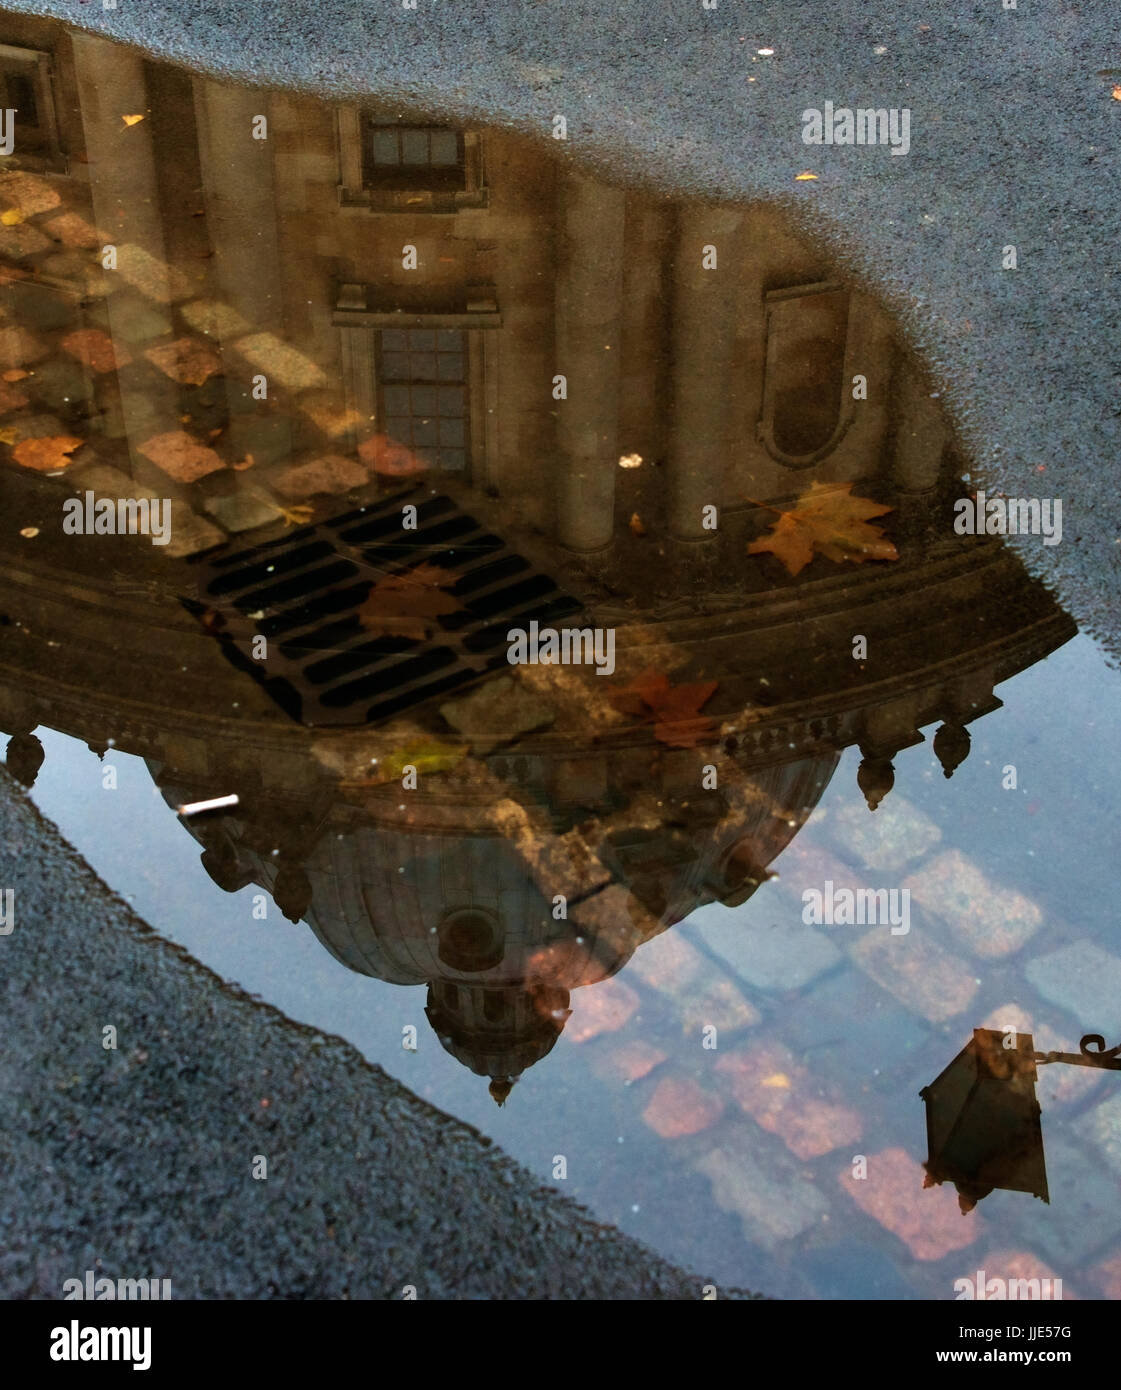 Radcliffe Camera, Oxford reflected in street puddle Stock Photo